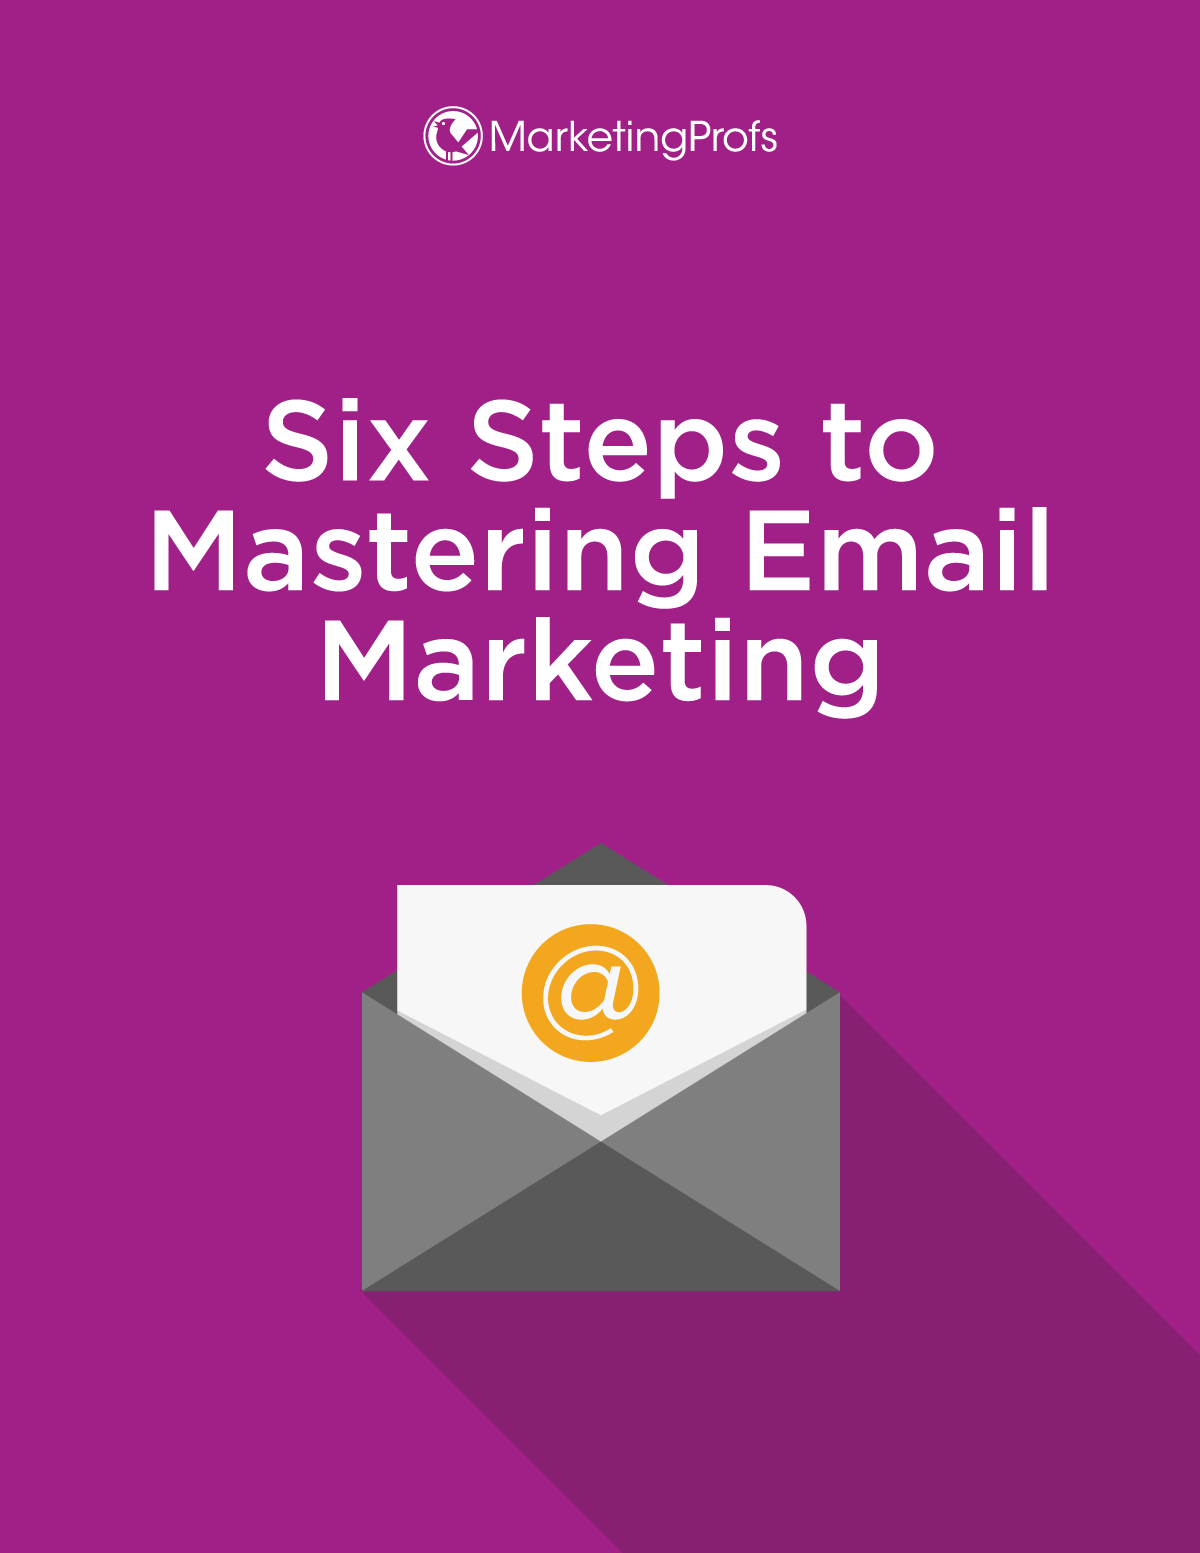 Six Steps to Mastering Email Marketing